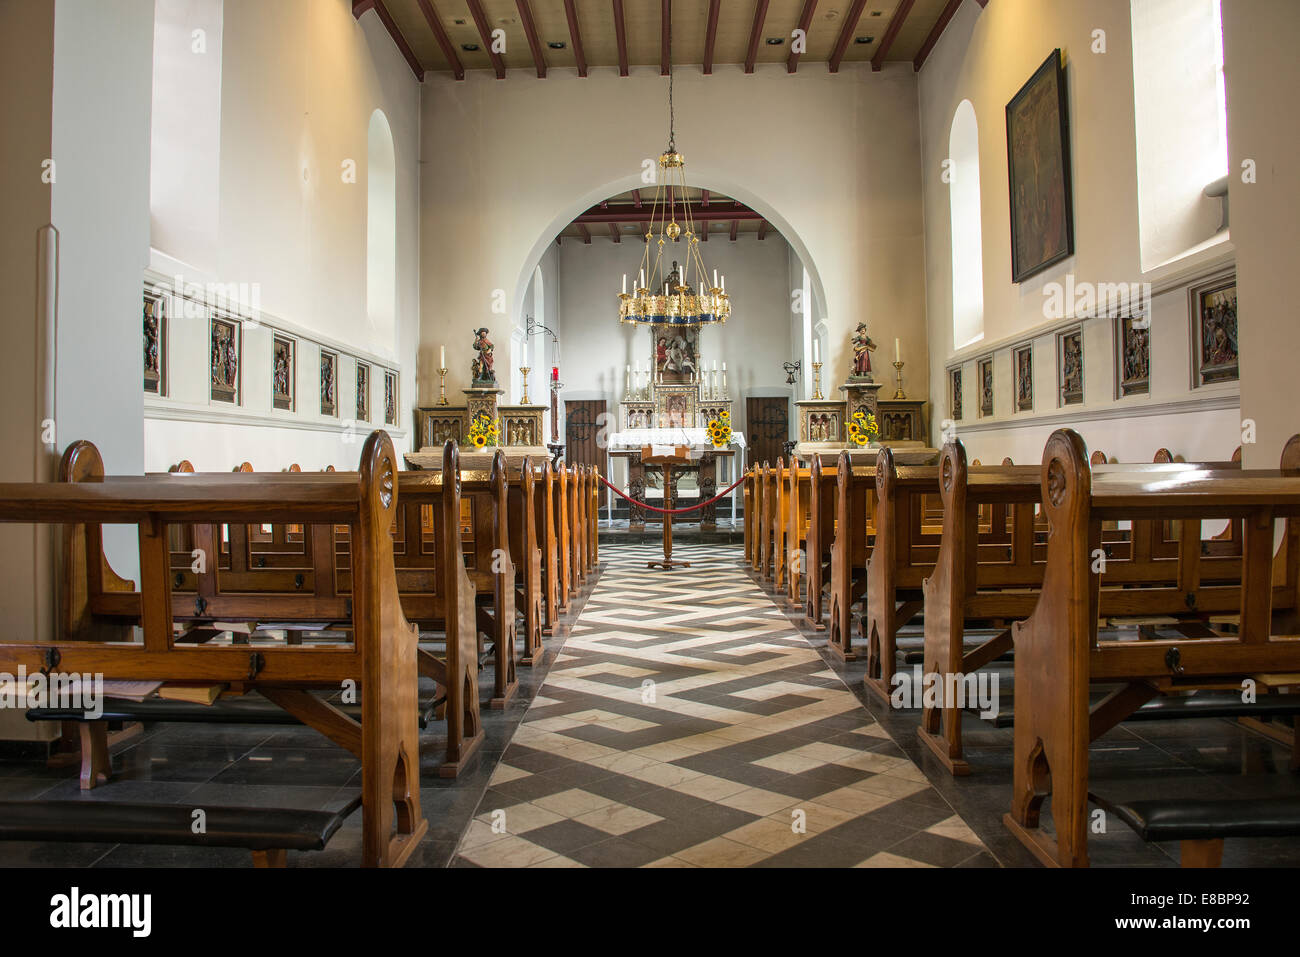 pews and inside church in holset village in holland Stock Photo